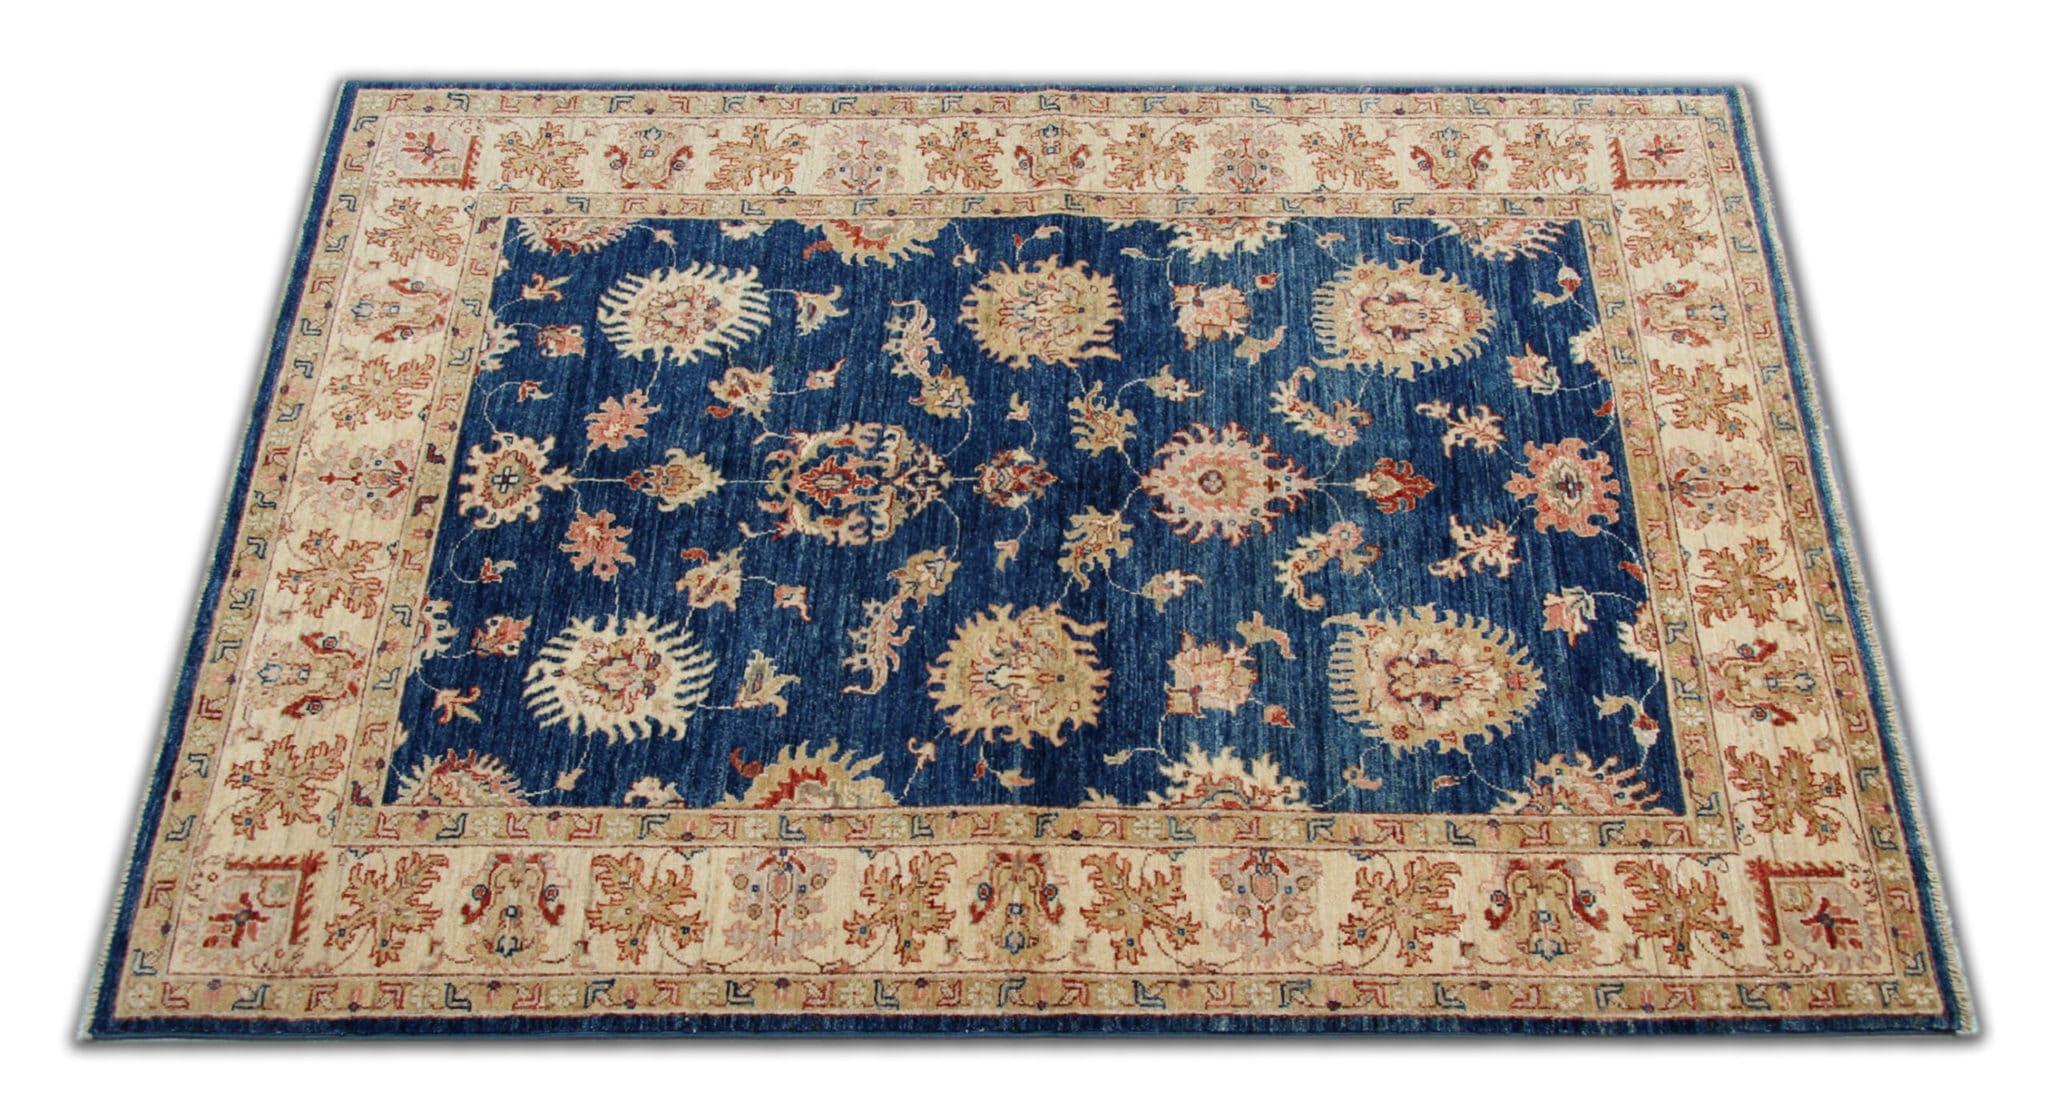 This stunning oriental rug blue Zeigler carpet elevates your living space, meticulously handcrafted to add an air of timeless elegance to any room. Ziegler rugs are renowned for their thick borders and intricate designs, combining traditional